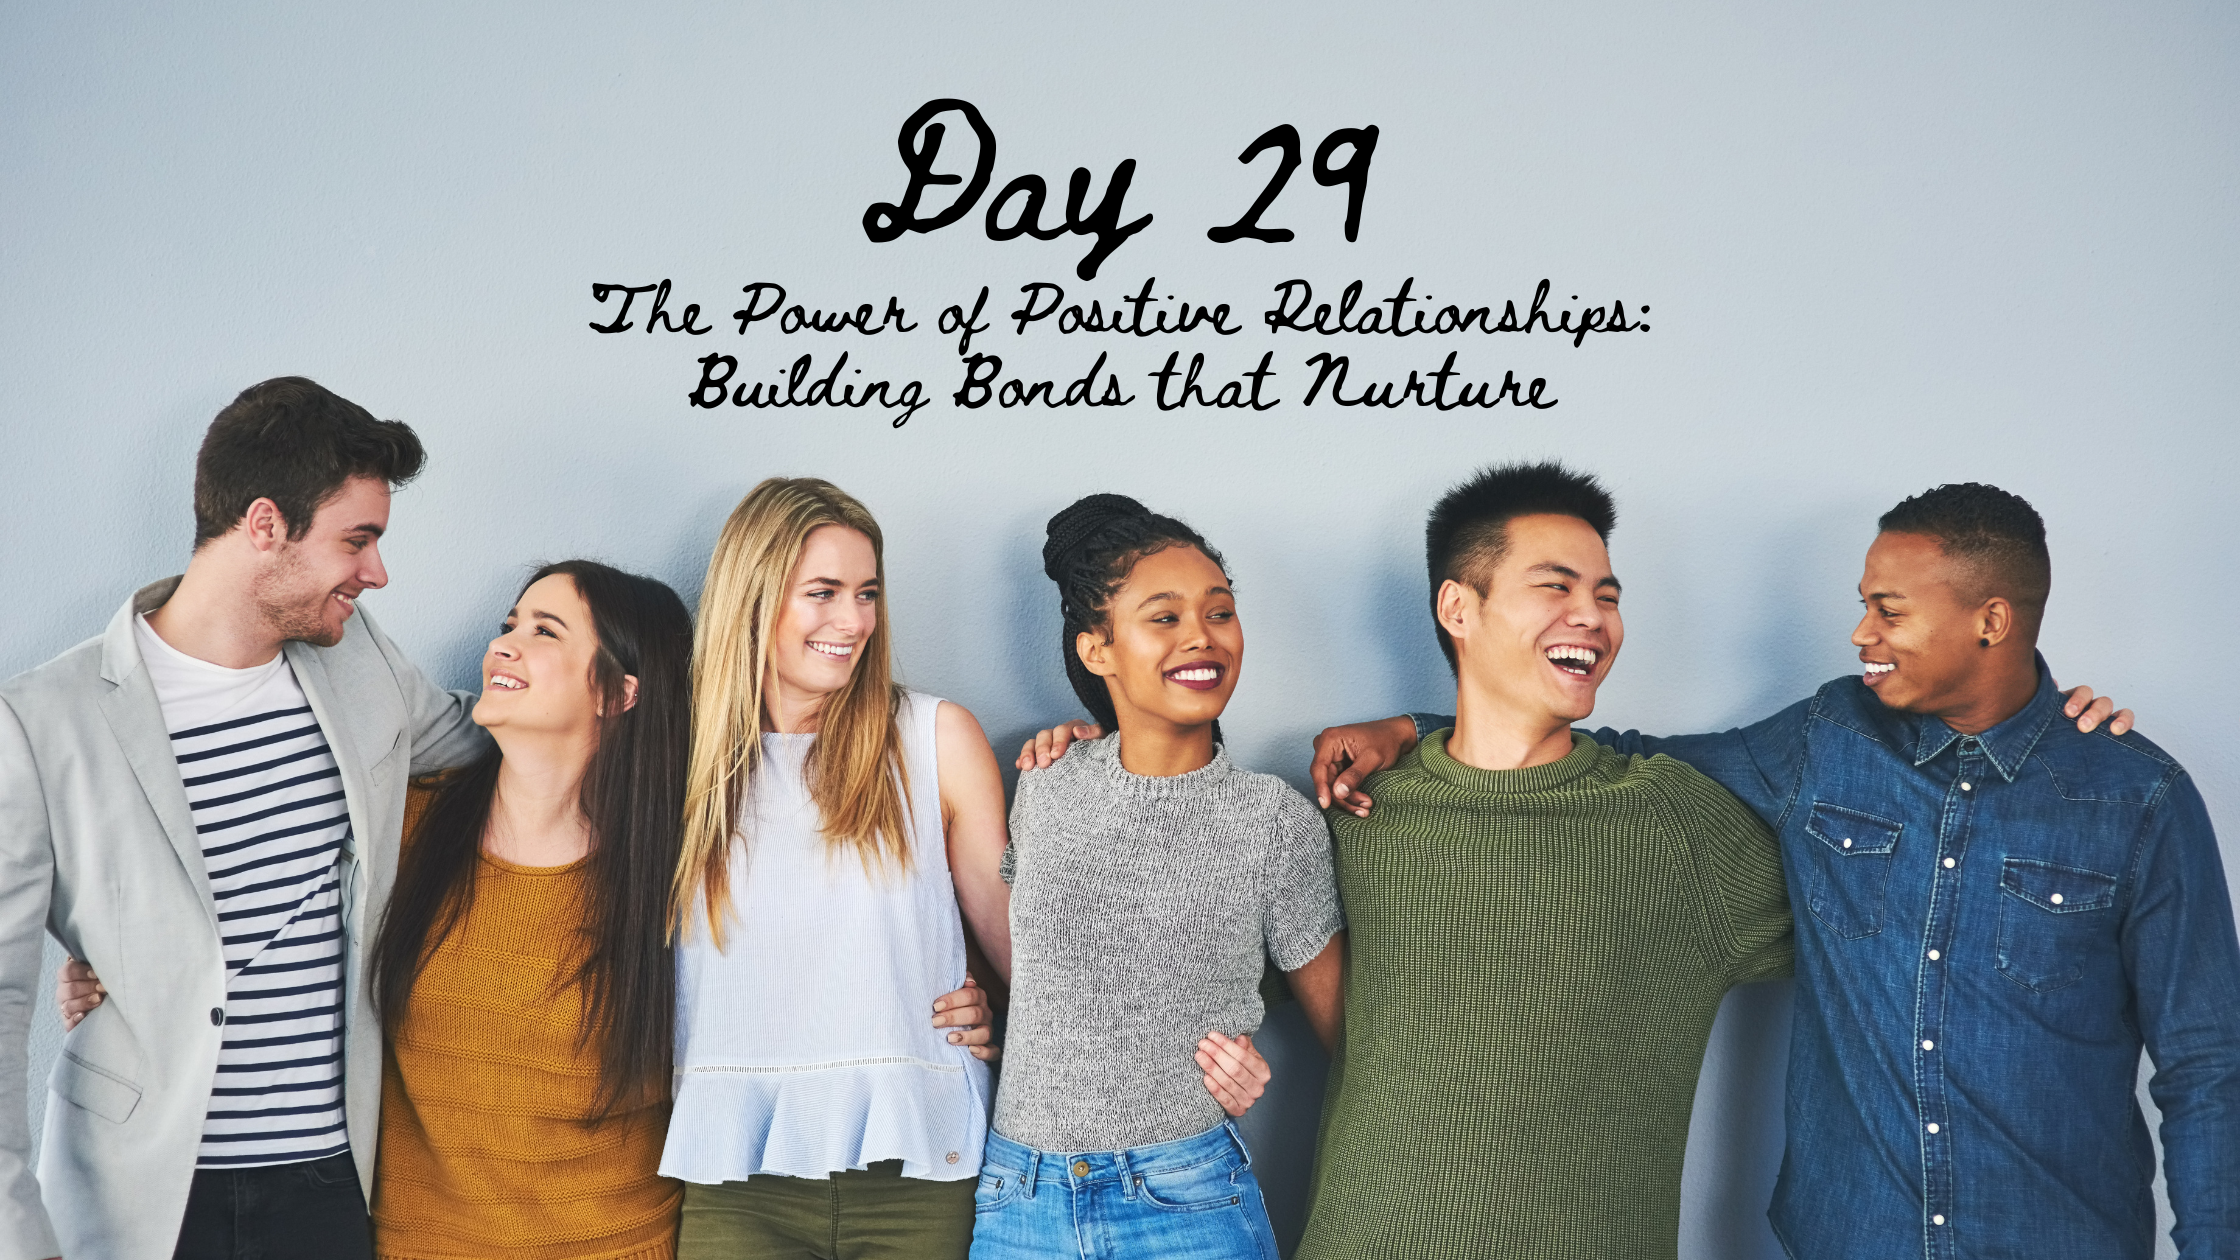 Day 29: The Power of Positive Relationships: Building Bonds that Nurture